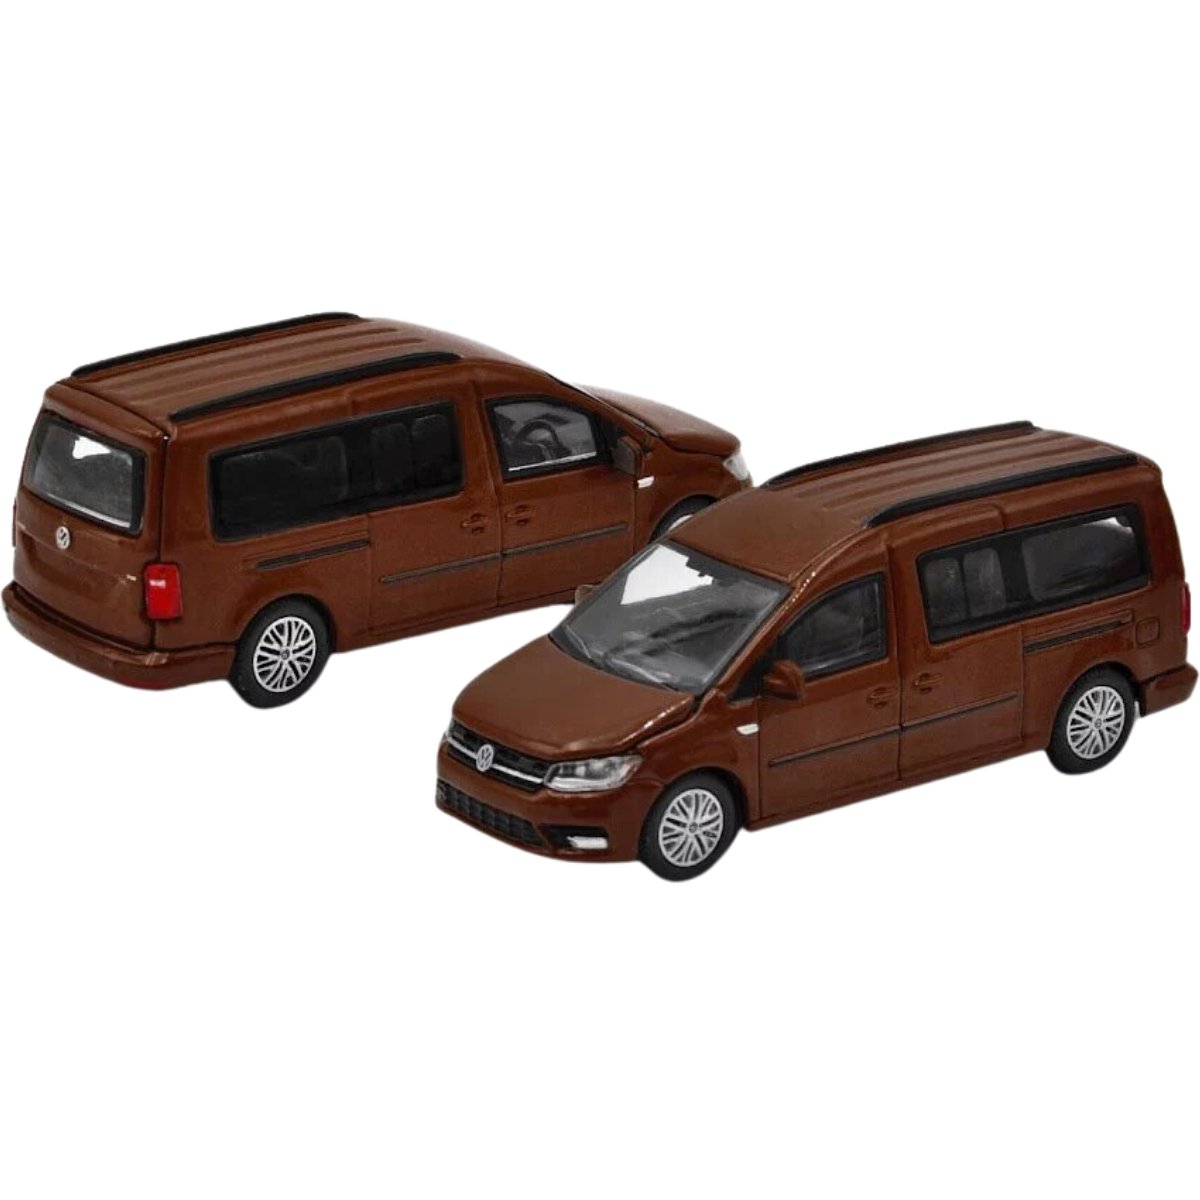 Era Car Volkswagen Caddy Maxi 1st Special Edition Chocolate (1:64 Scale) - Phillips Hobbies